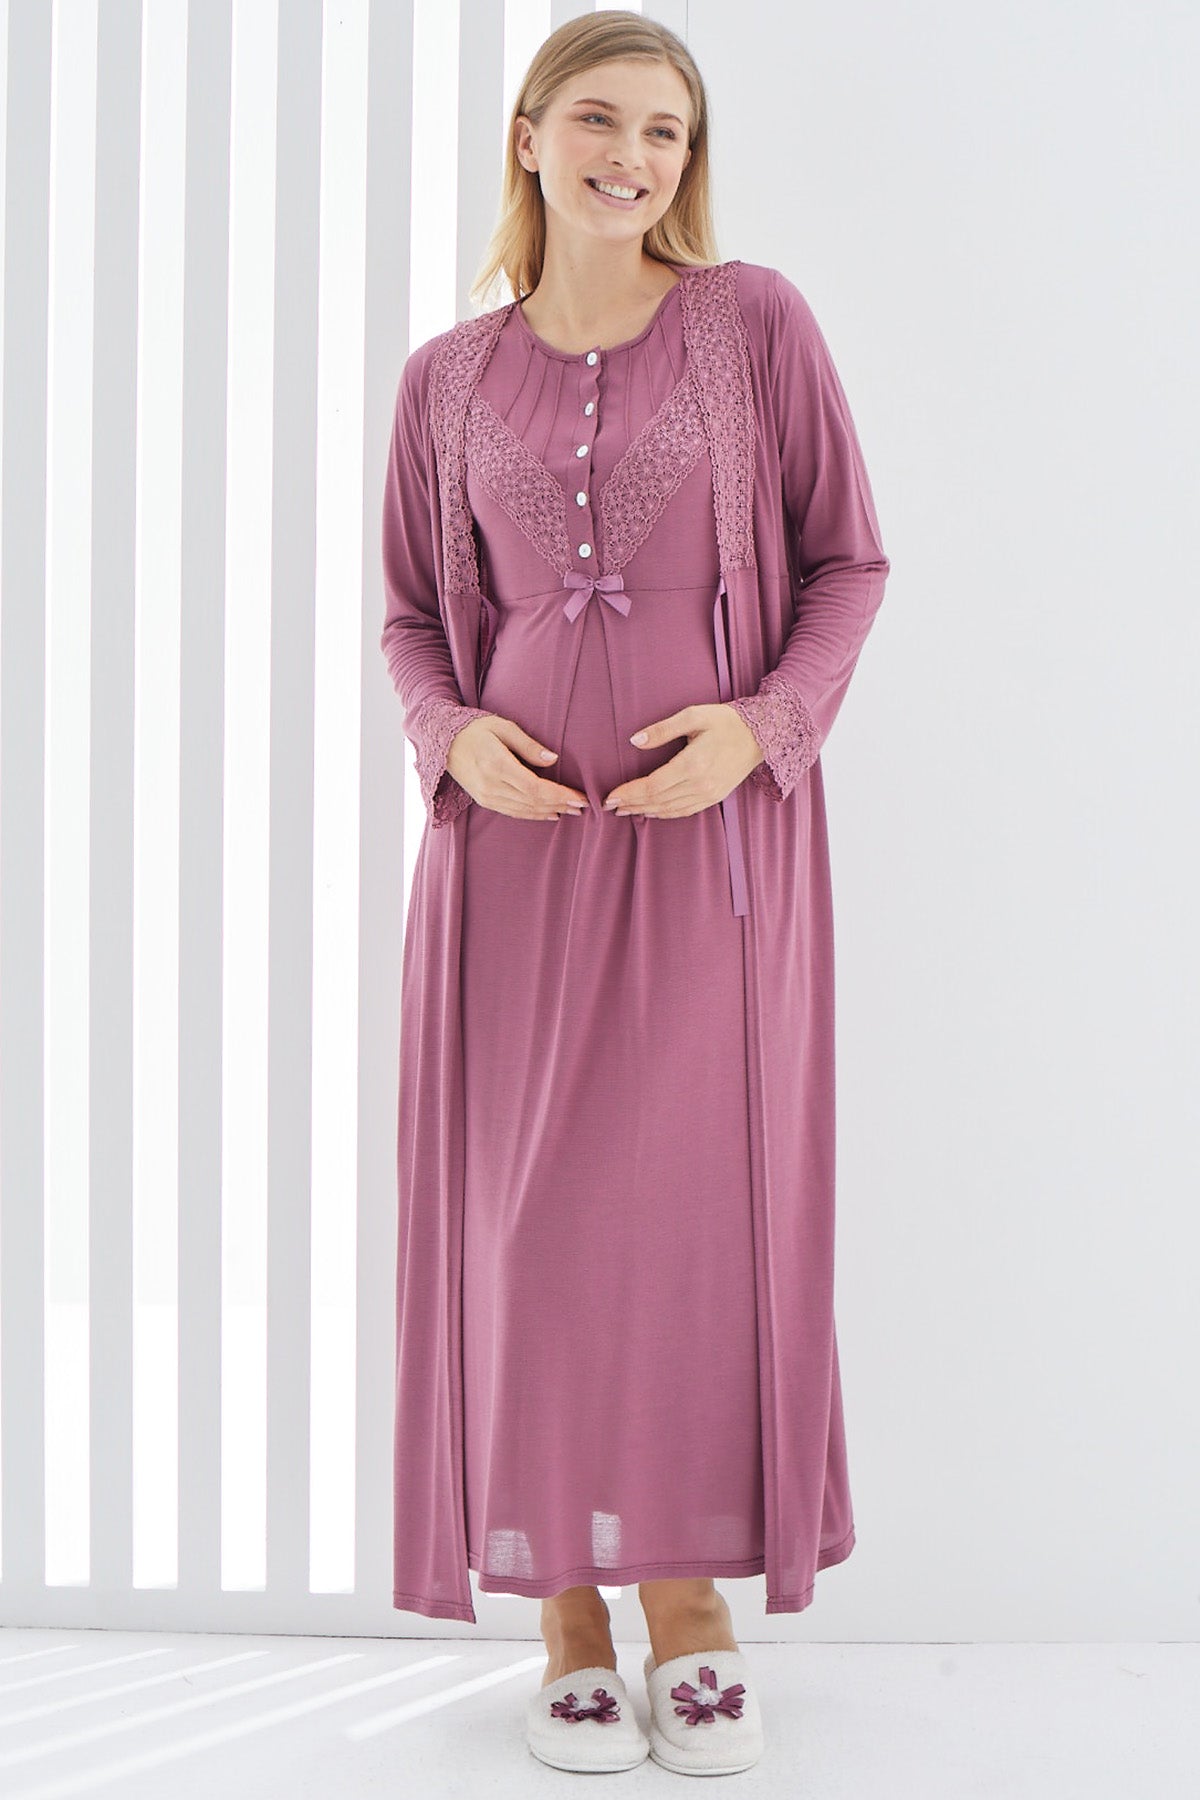 Shopymommy 2270 Lace Detailed Maternity & Nursing Nightgown With Robe Plum